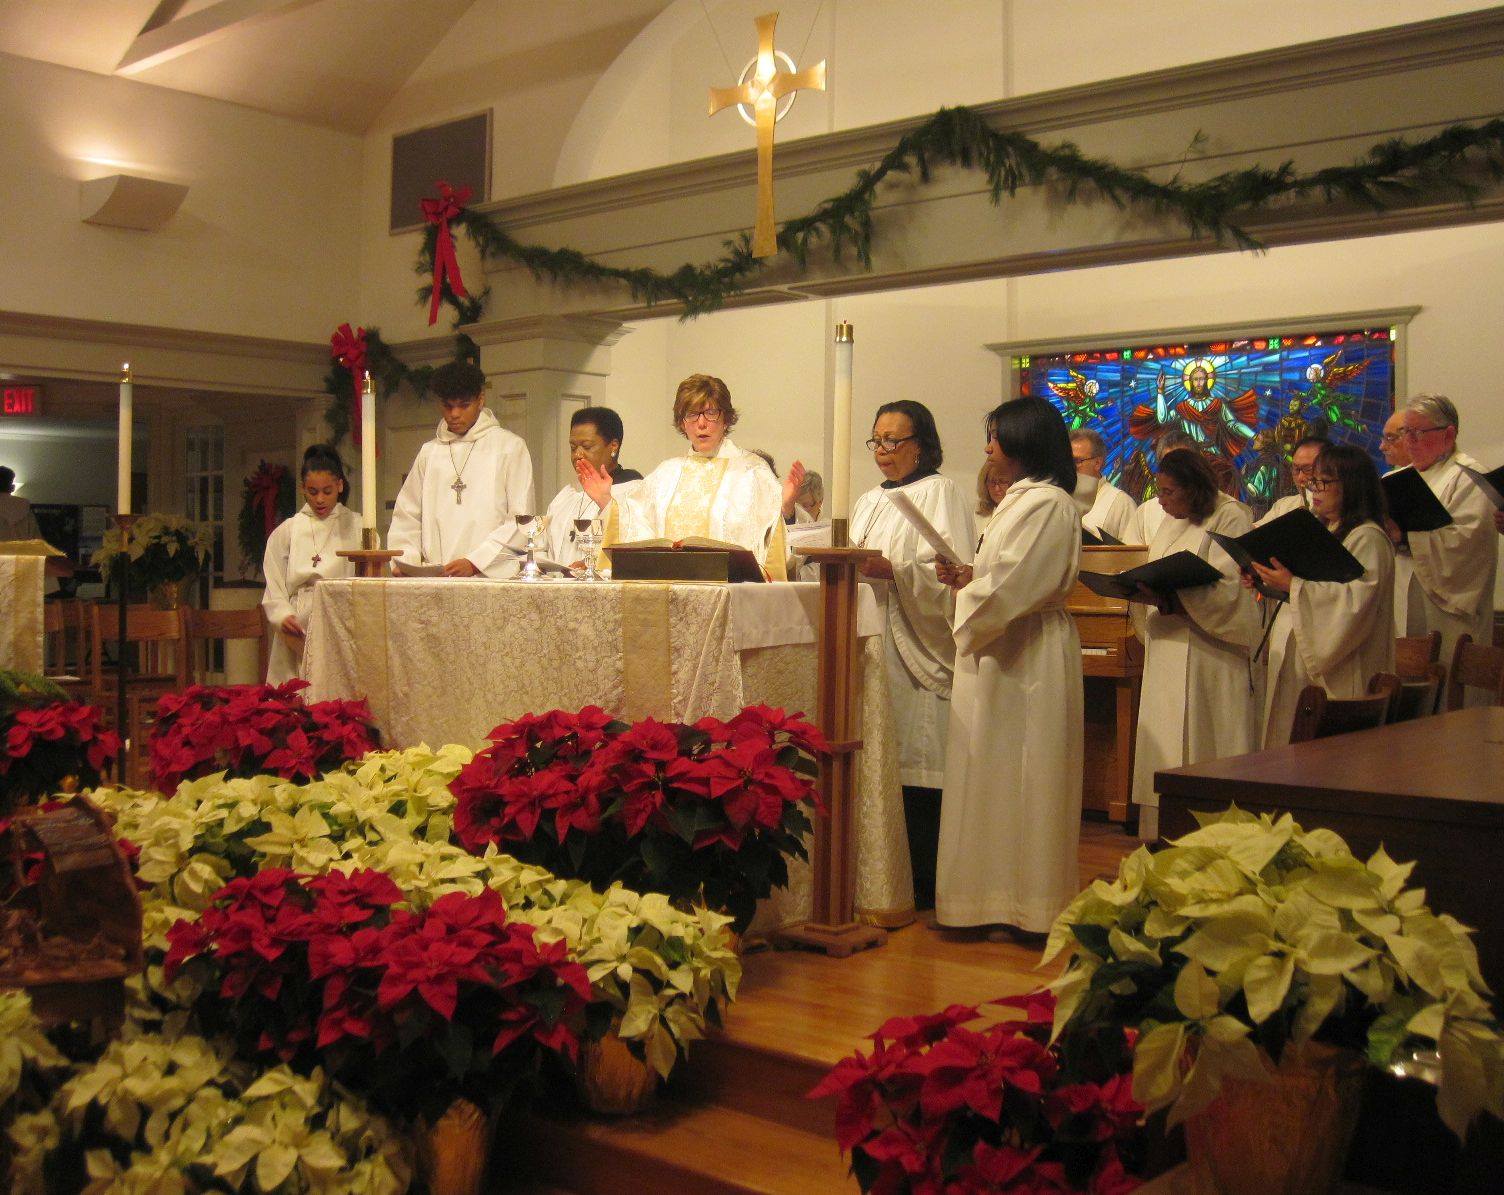 St. Mark’s Advent & Christmas Services Schedule